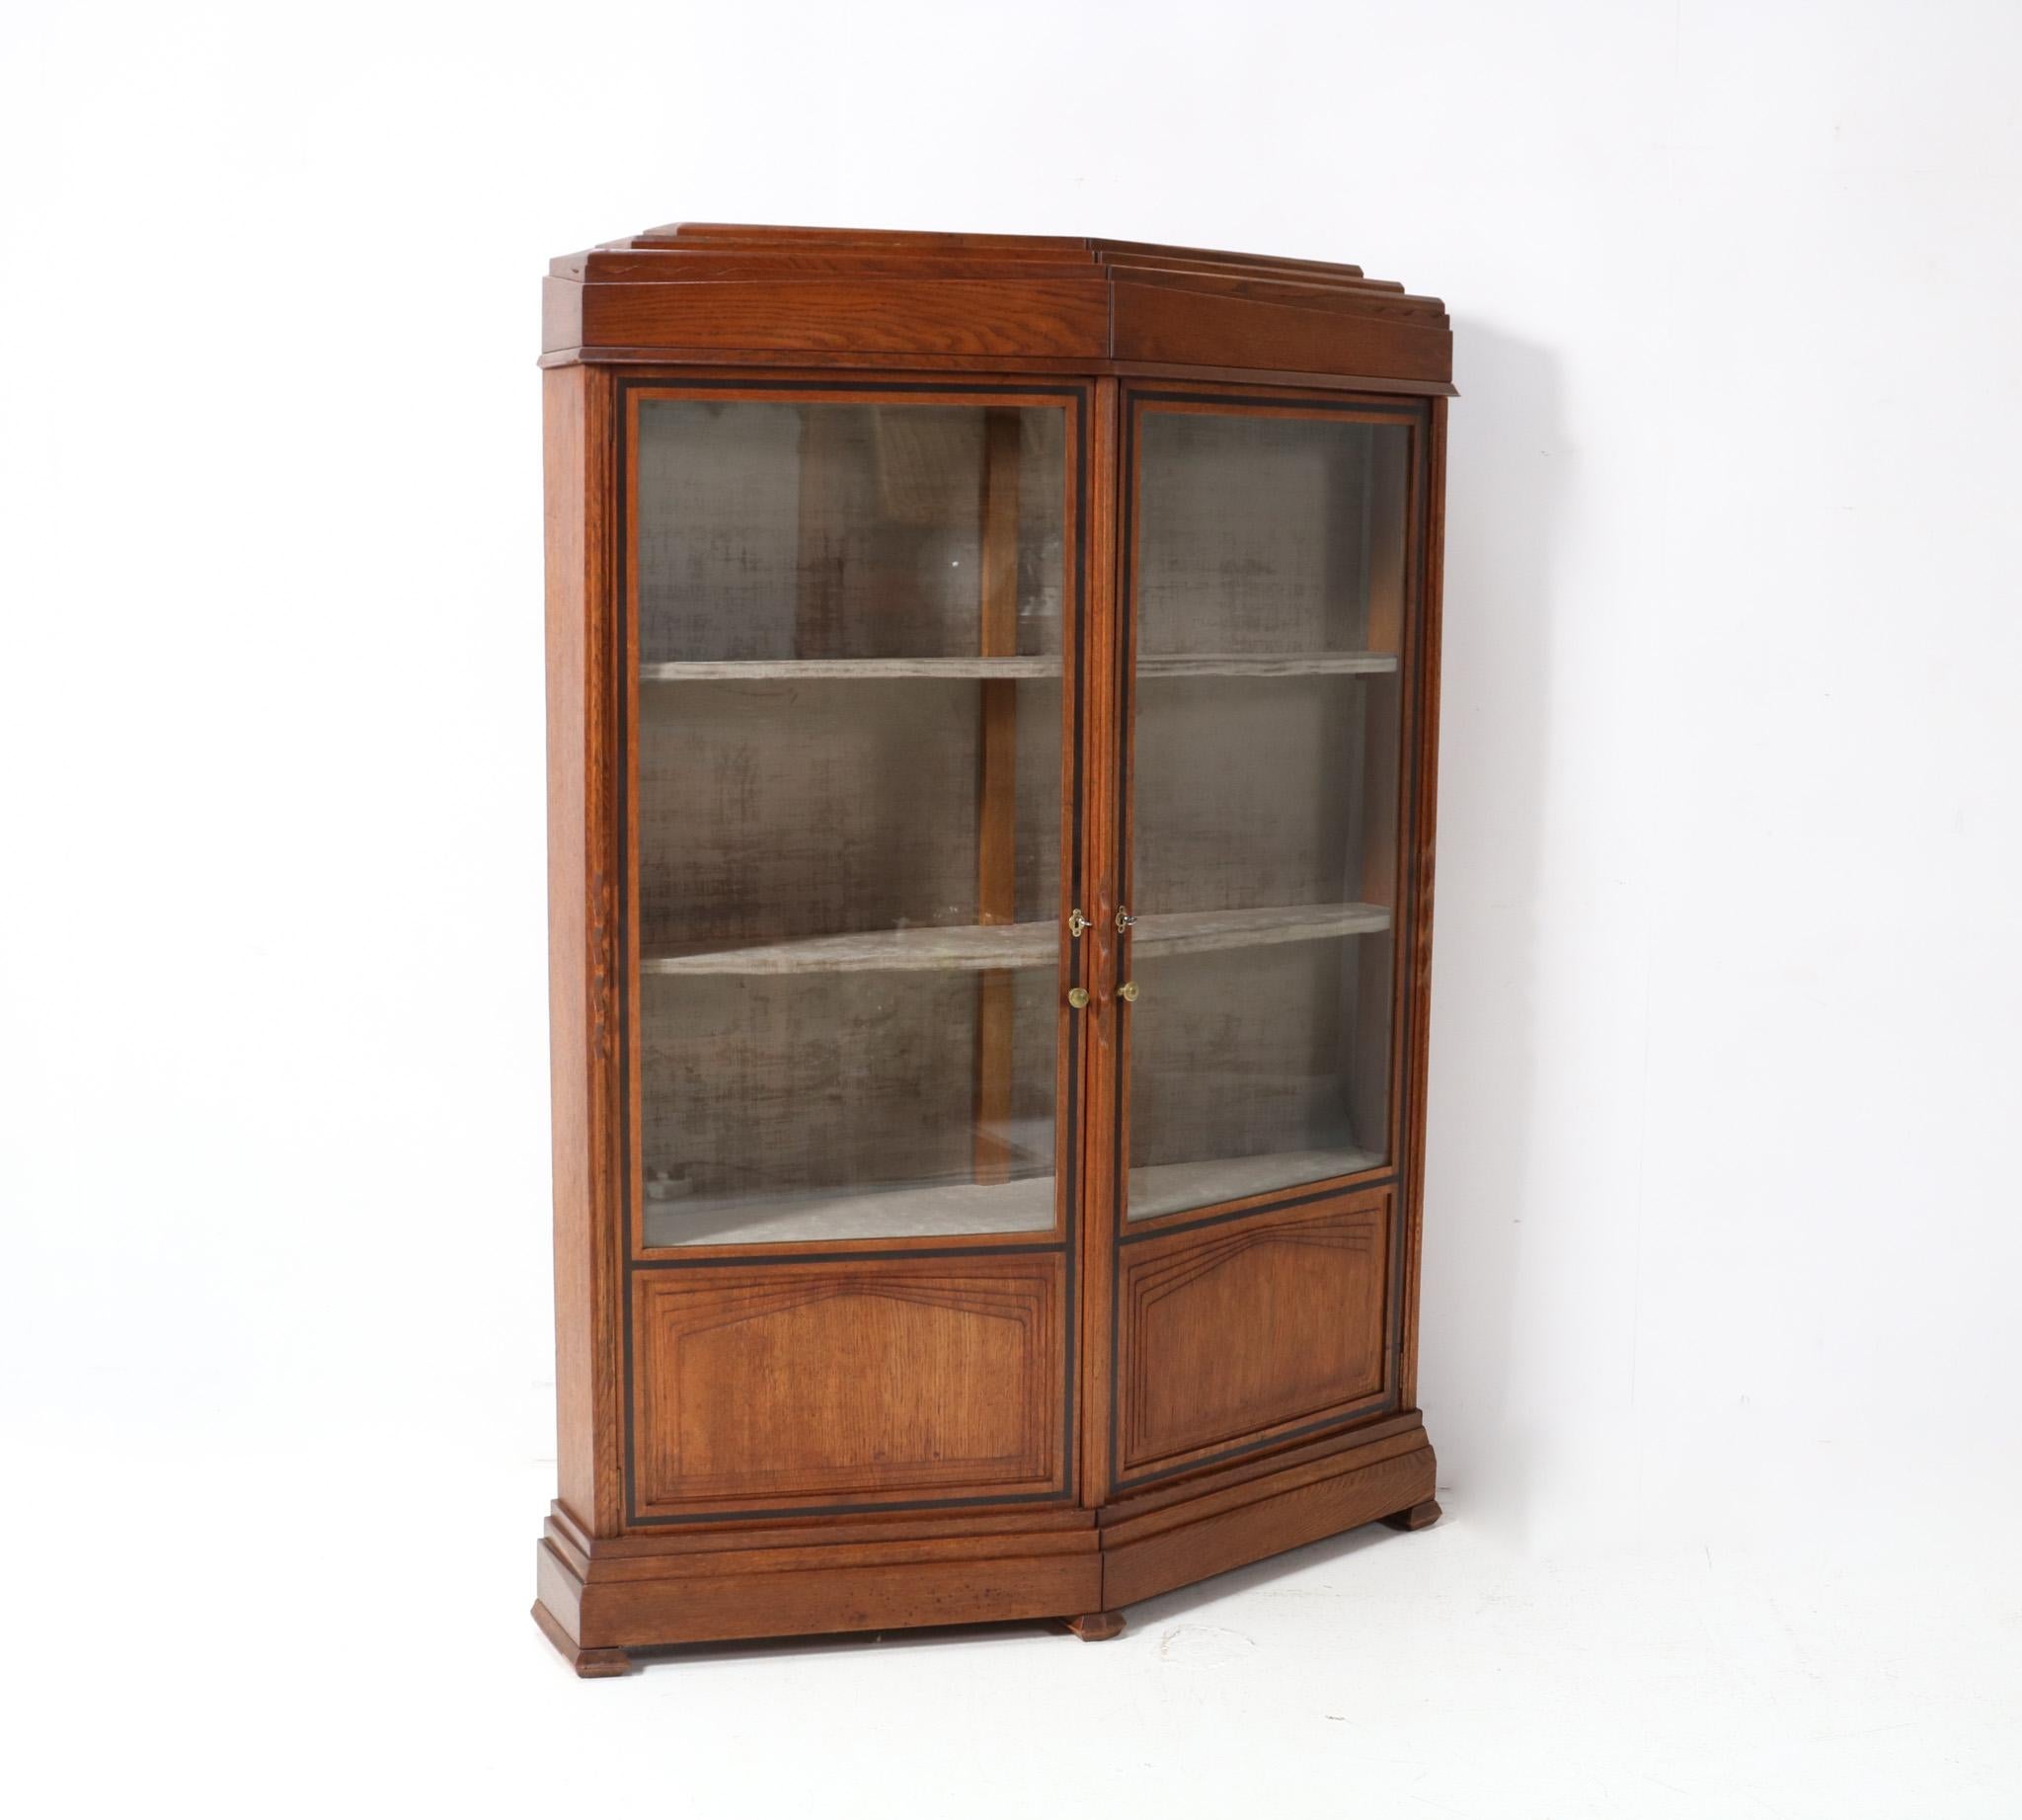 Magnificent and ultra rare Art Deco Amsterdamse School vitrine or display cabinet.
Design by Cornelis van der Sluys.
Striking Dutch design from 1918.
Solid oak with typical decorative Amsterdamse School elements and original brass key entrances.
The